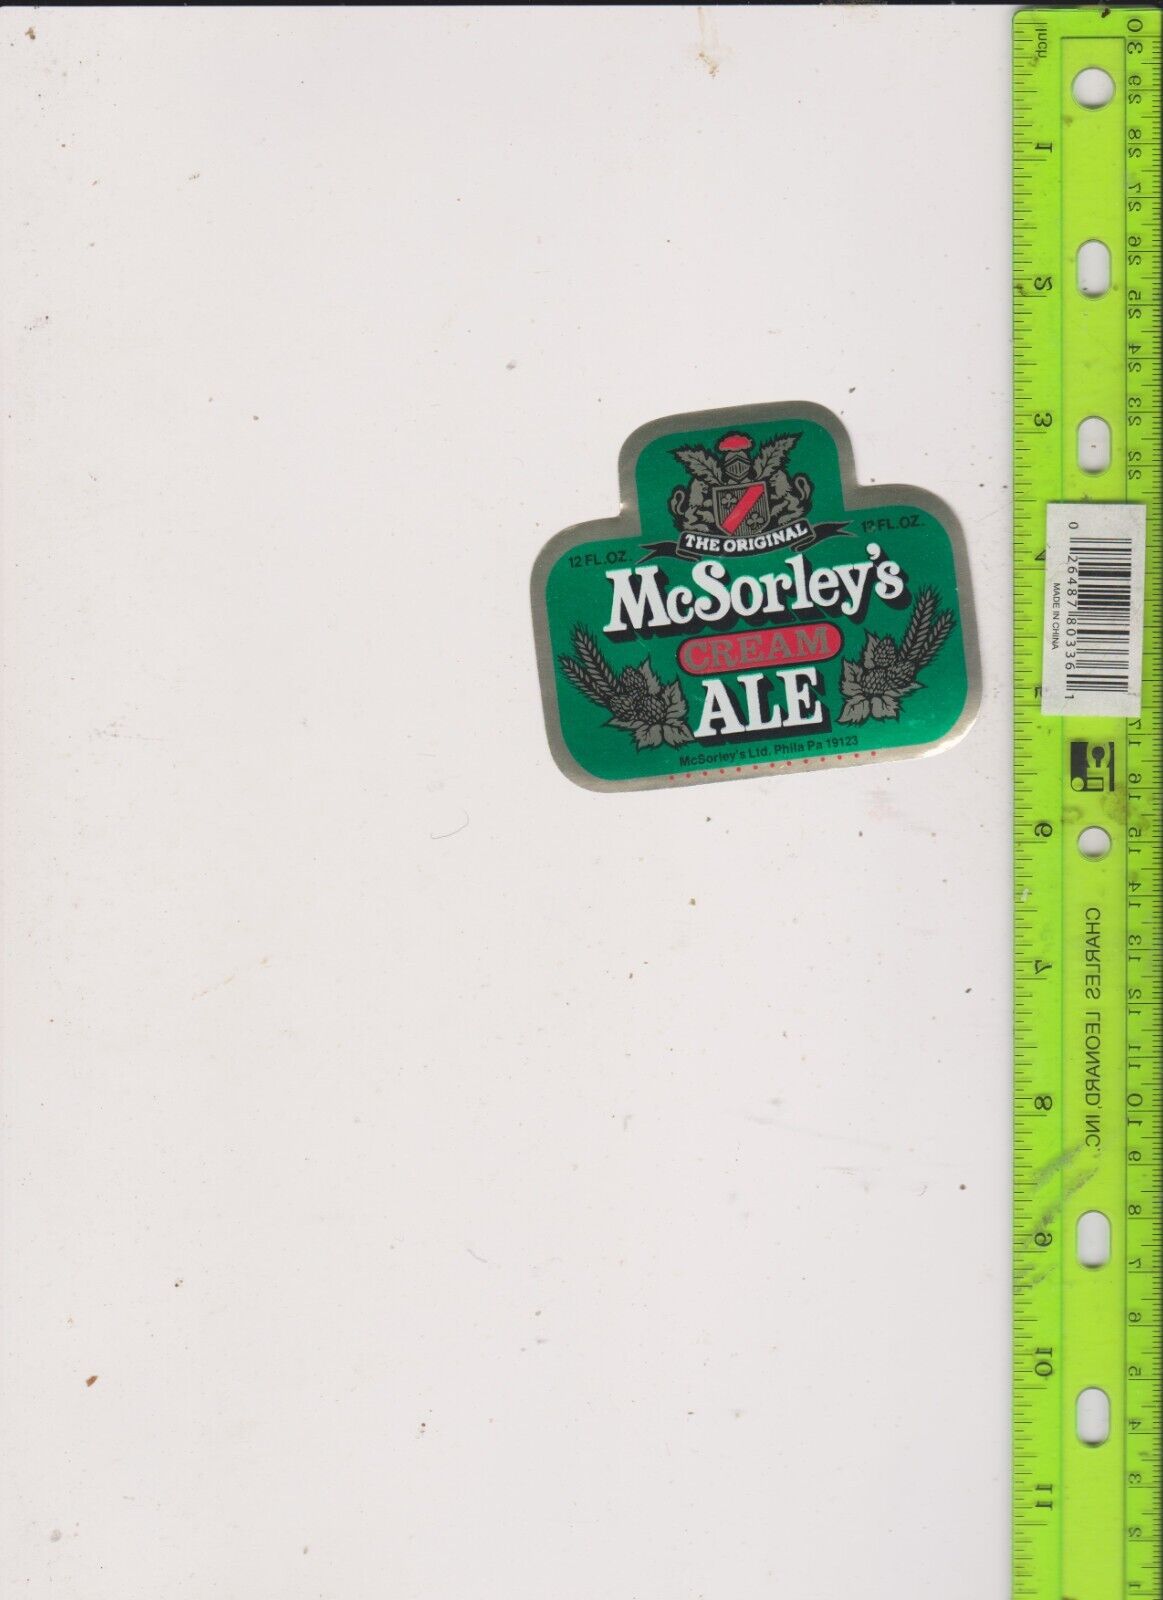 VINTAGE McSORLEY'S CREAM ALE BEER LABEL.FREE SHIPPING IN U.S